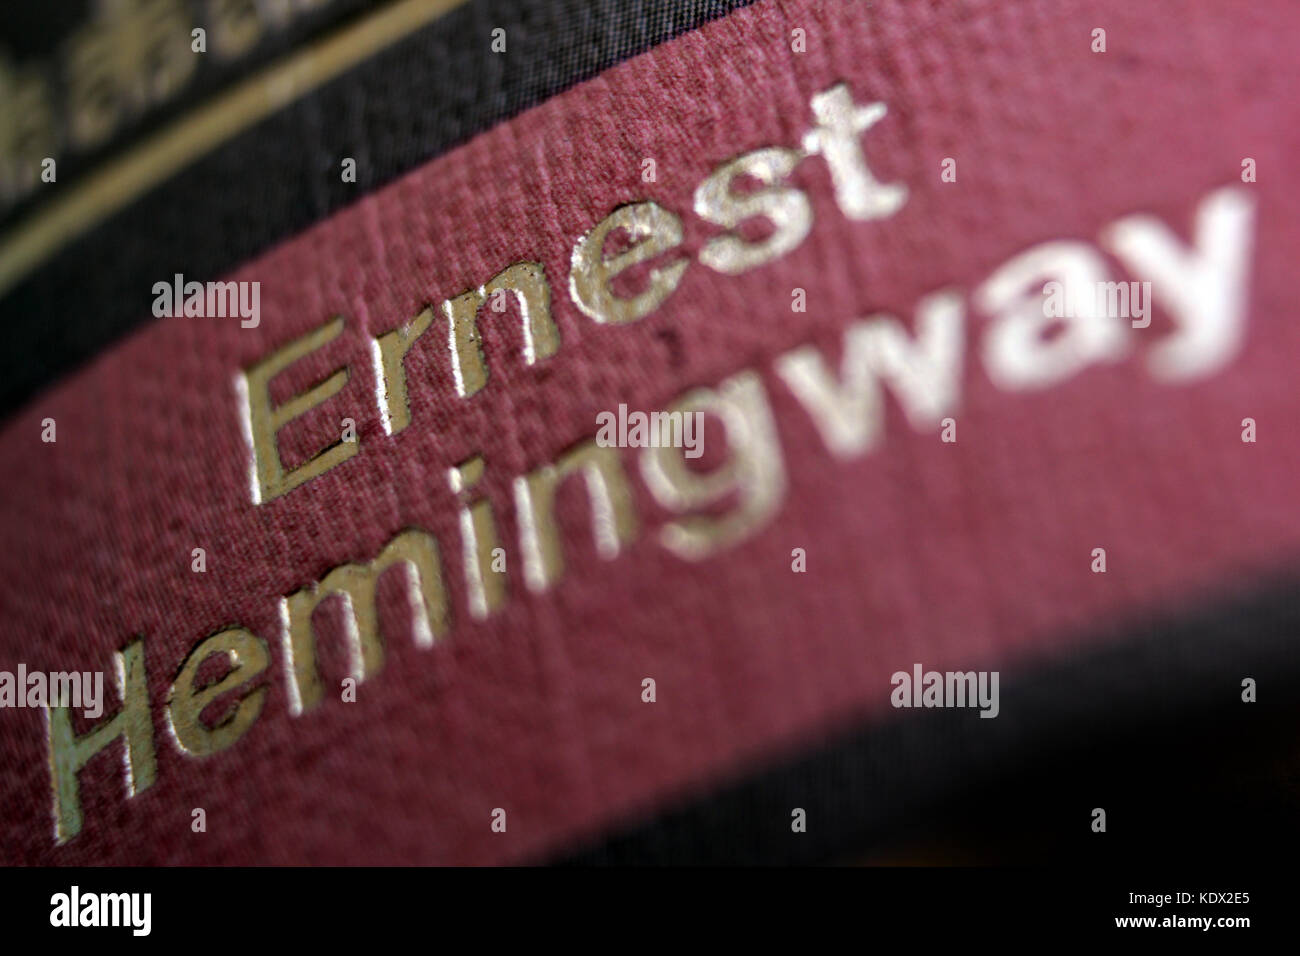 Ernest Hemingway title printed in book spine, close-up Stock Photo